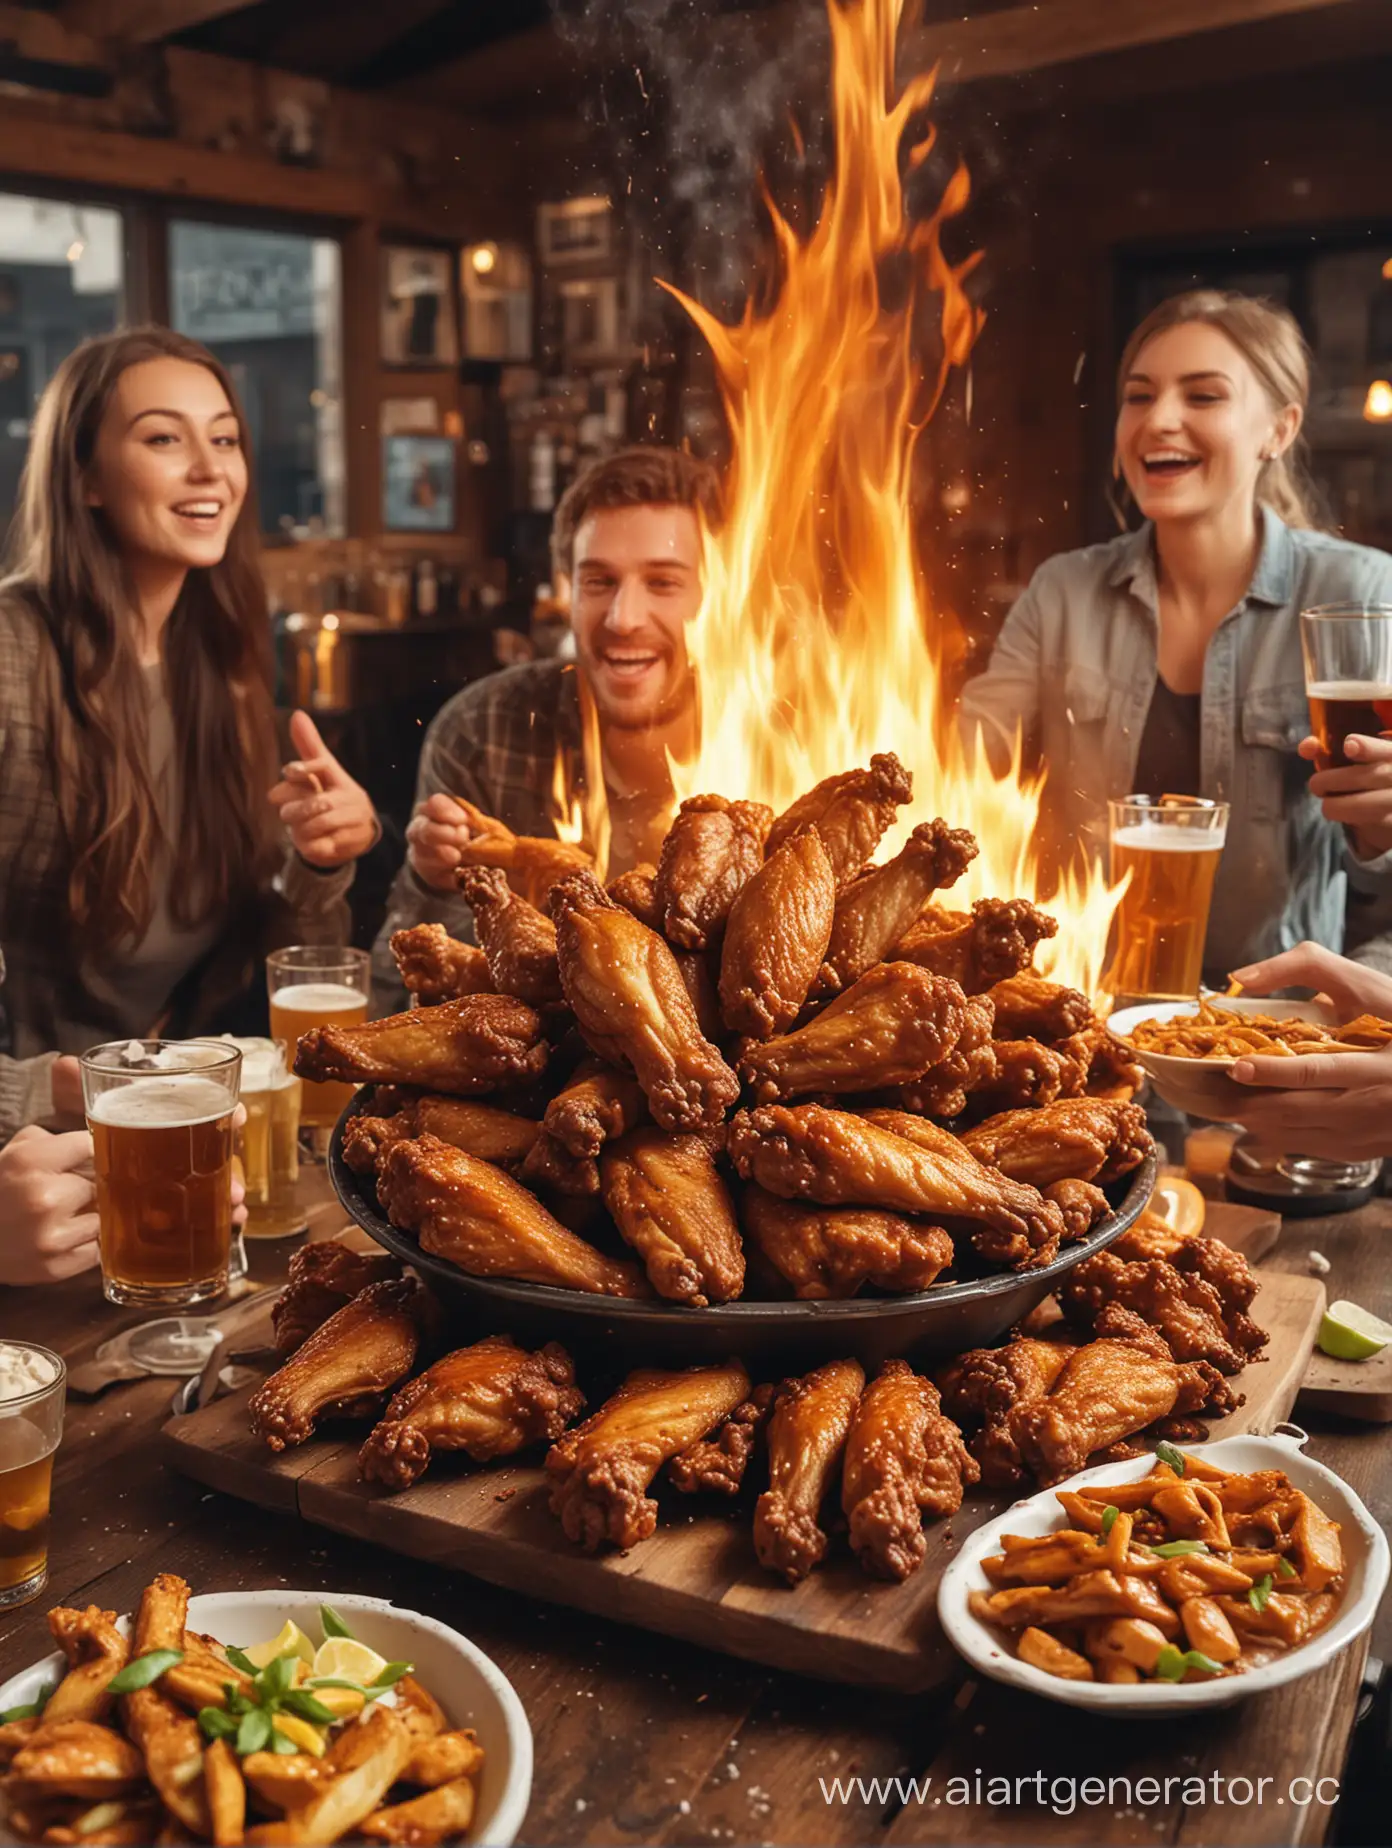 Sizzling-Hot-Wings-Pub-Dining-Experience-with-Joyful-Patrons